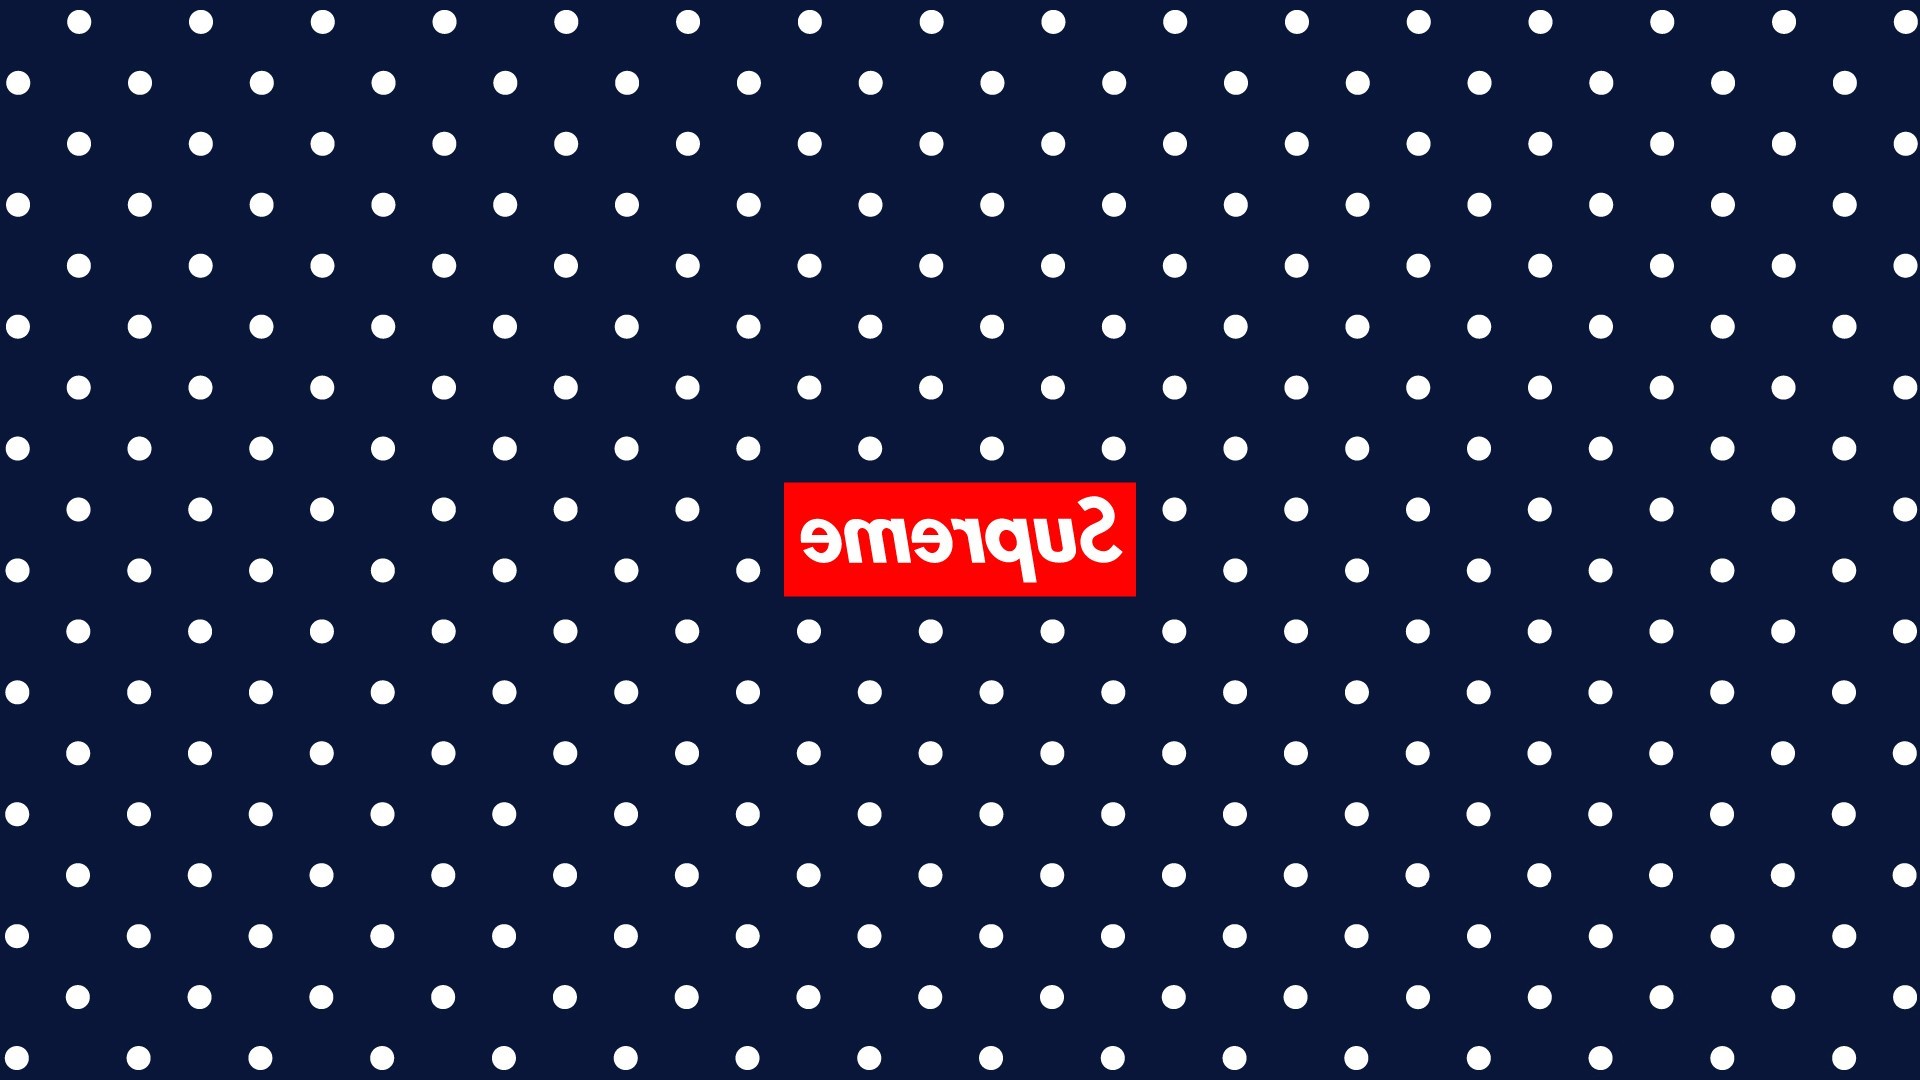 1920x1080 Supreme Wallpaper Ahoodie Iphone wallpaper - iphone Images - Frompo